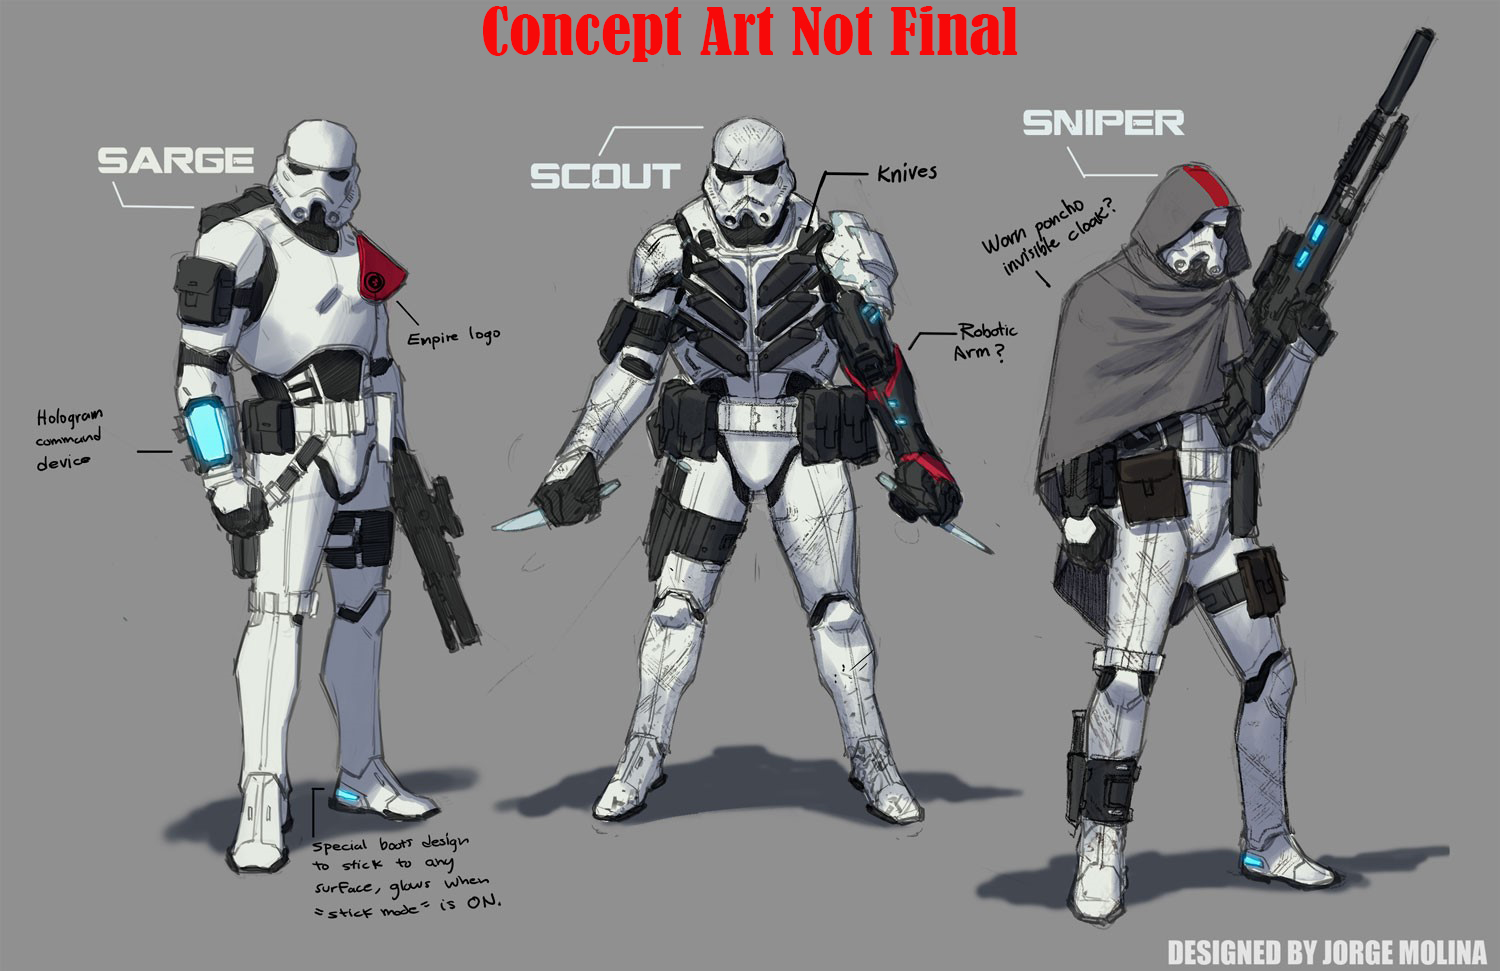 The Star Wars Comic’s New Stormtroopers Look Absurdly Awesome